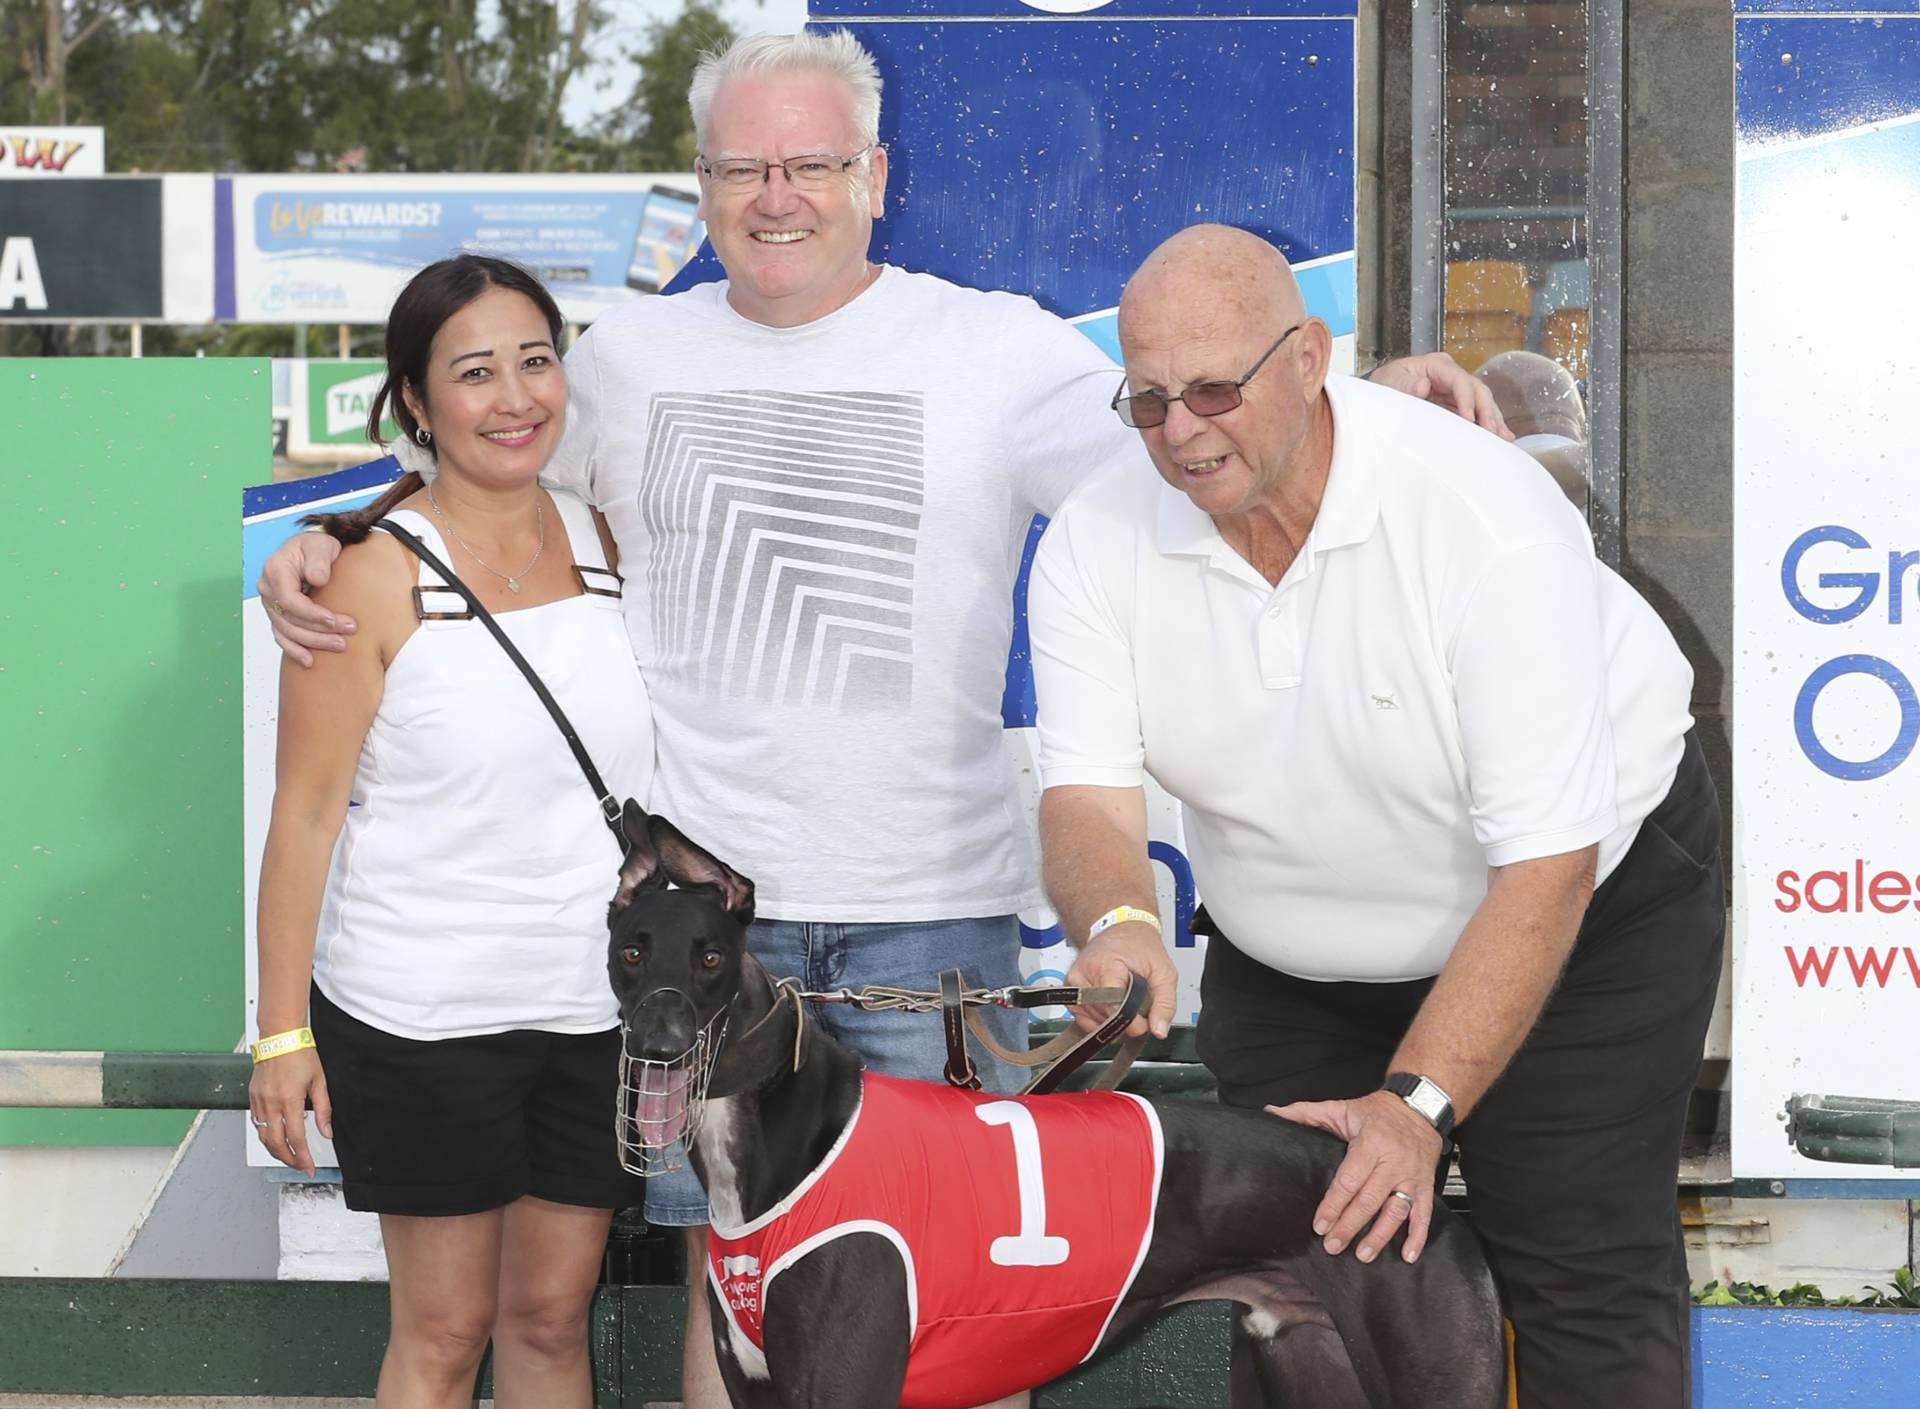 This is Why We Love the Great Sport of Greyhound Racing  – And Why I Love Bunny Brasch